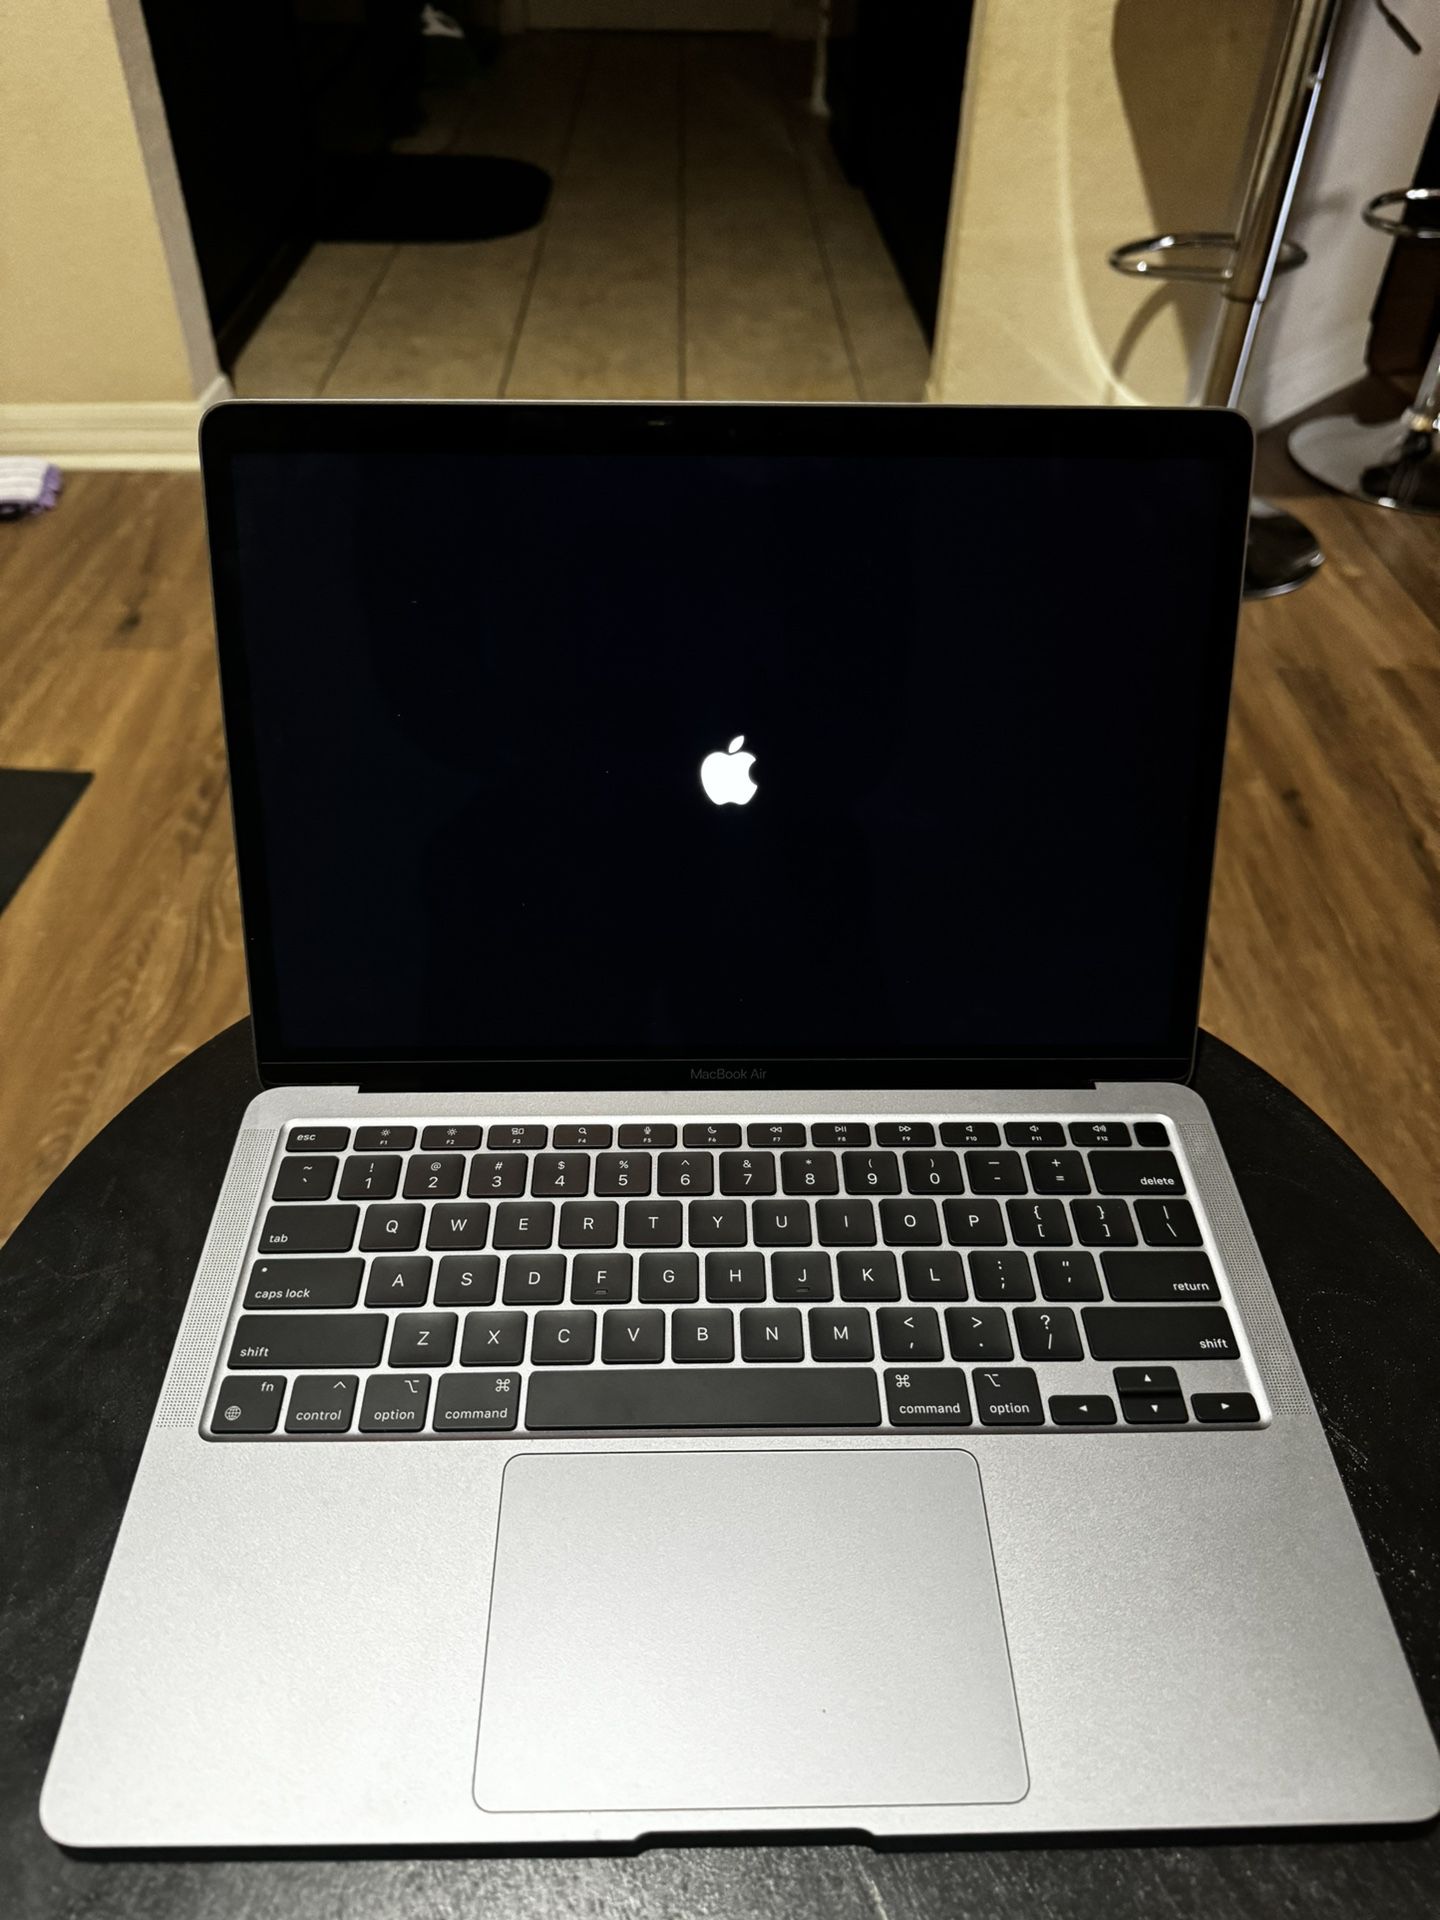 Apple MacBook Air 13in (256GB SSD, M1, 8GB) Laptop - Space Gray - MGN63LL/A...